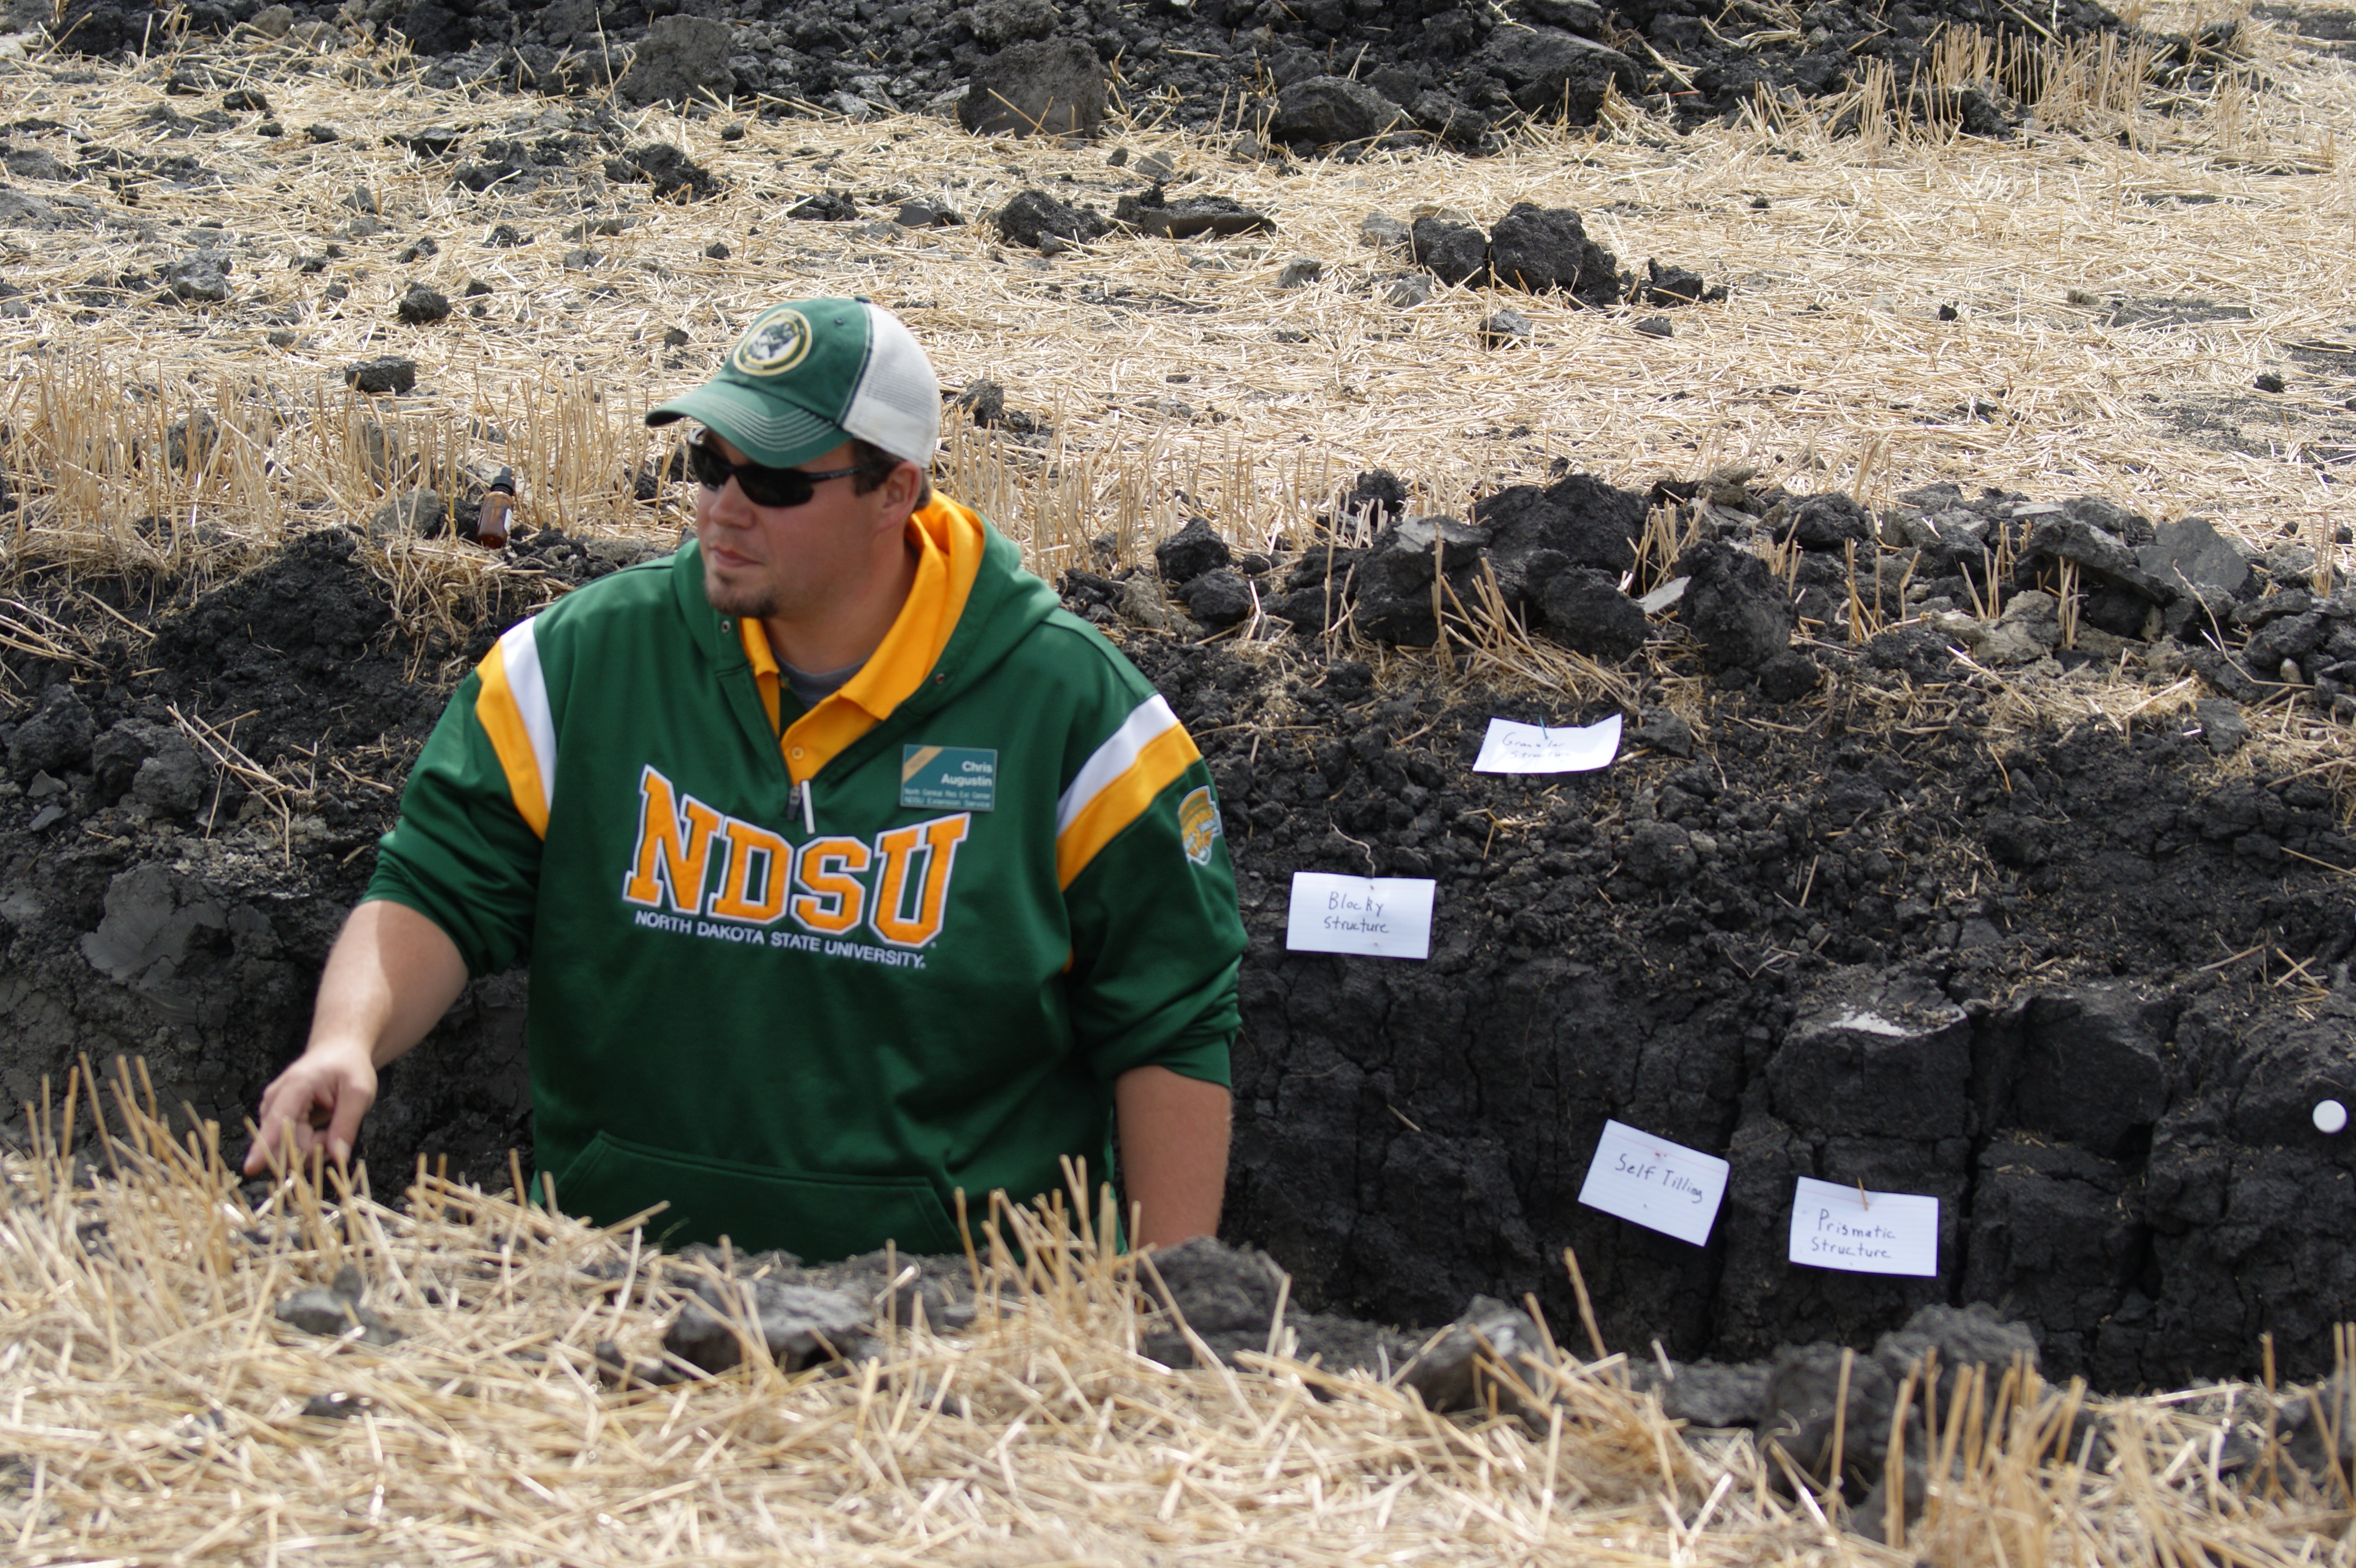 NDSU Extension soil health specialist Chris Augustin explains what is happening in the soil at this demonstration pit. (NDSU photo)